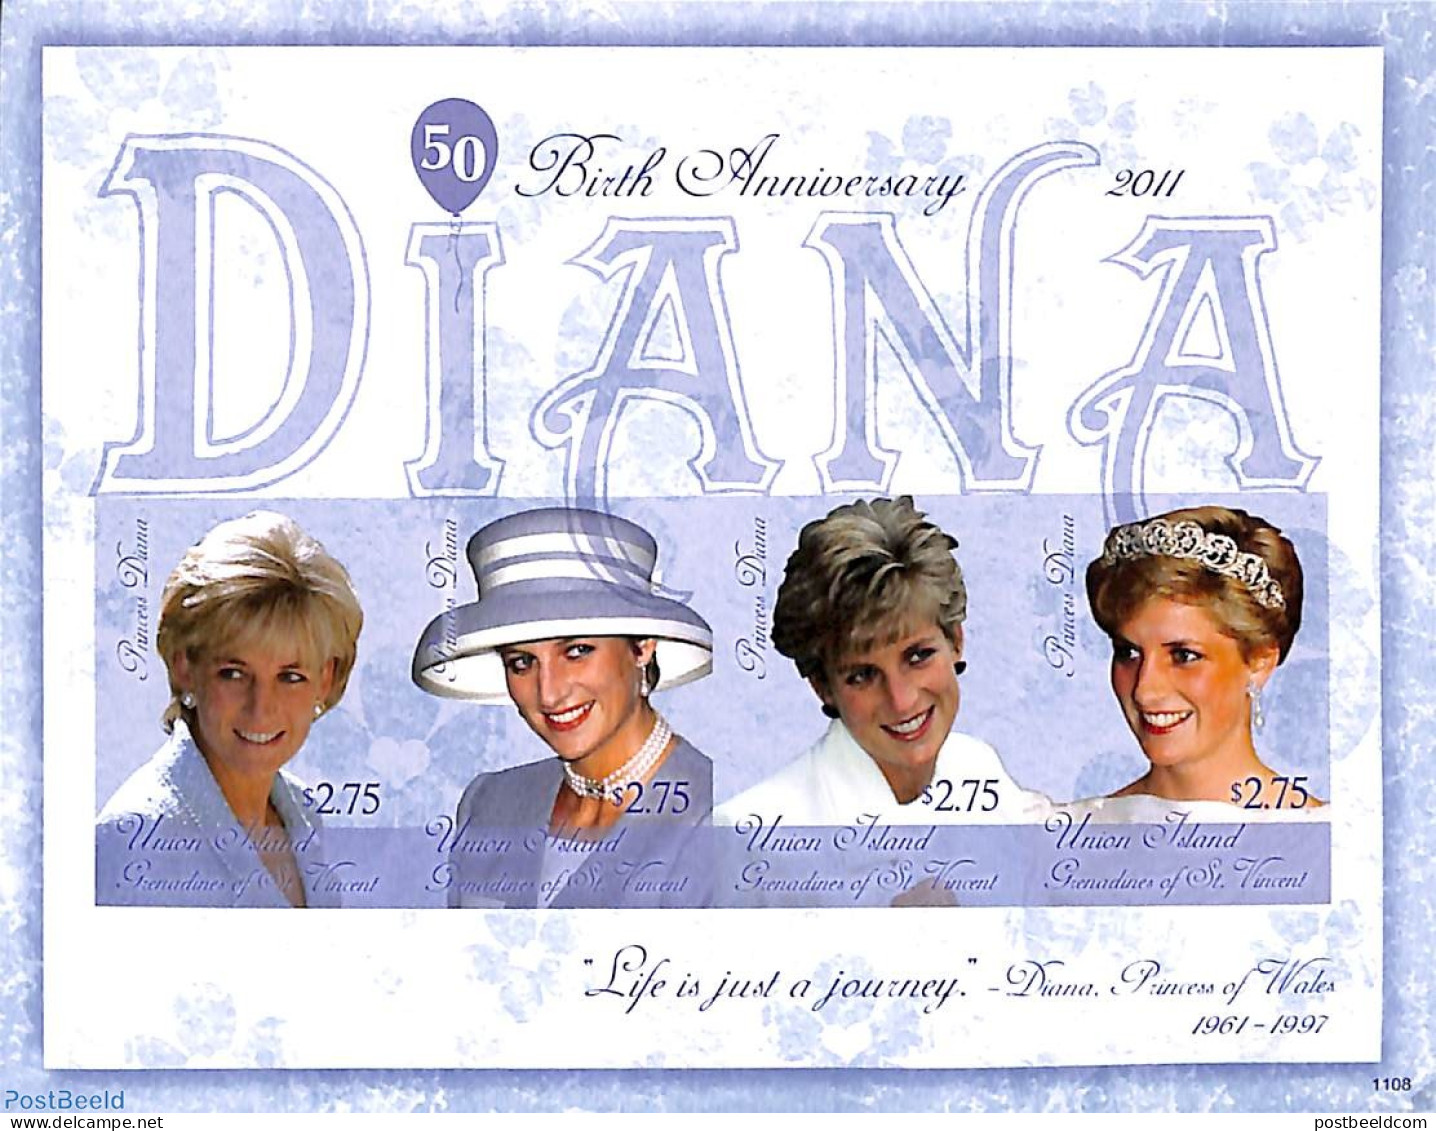 Saint Vincent & The Grenadines 2011 Princess Diana 4v M/s, Imperforated, Mint NH, History - Charles & Diana - Kings & .. - Familles Royales